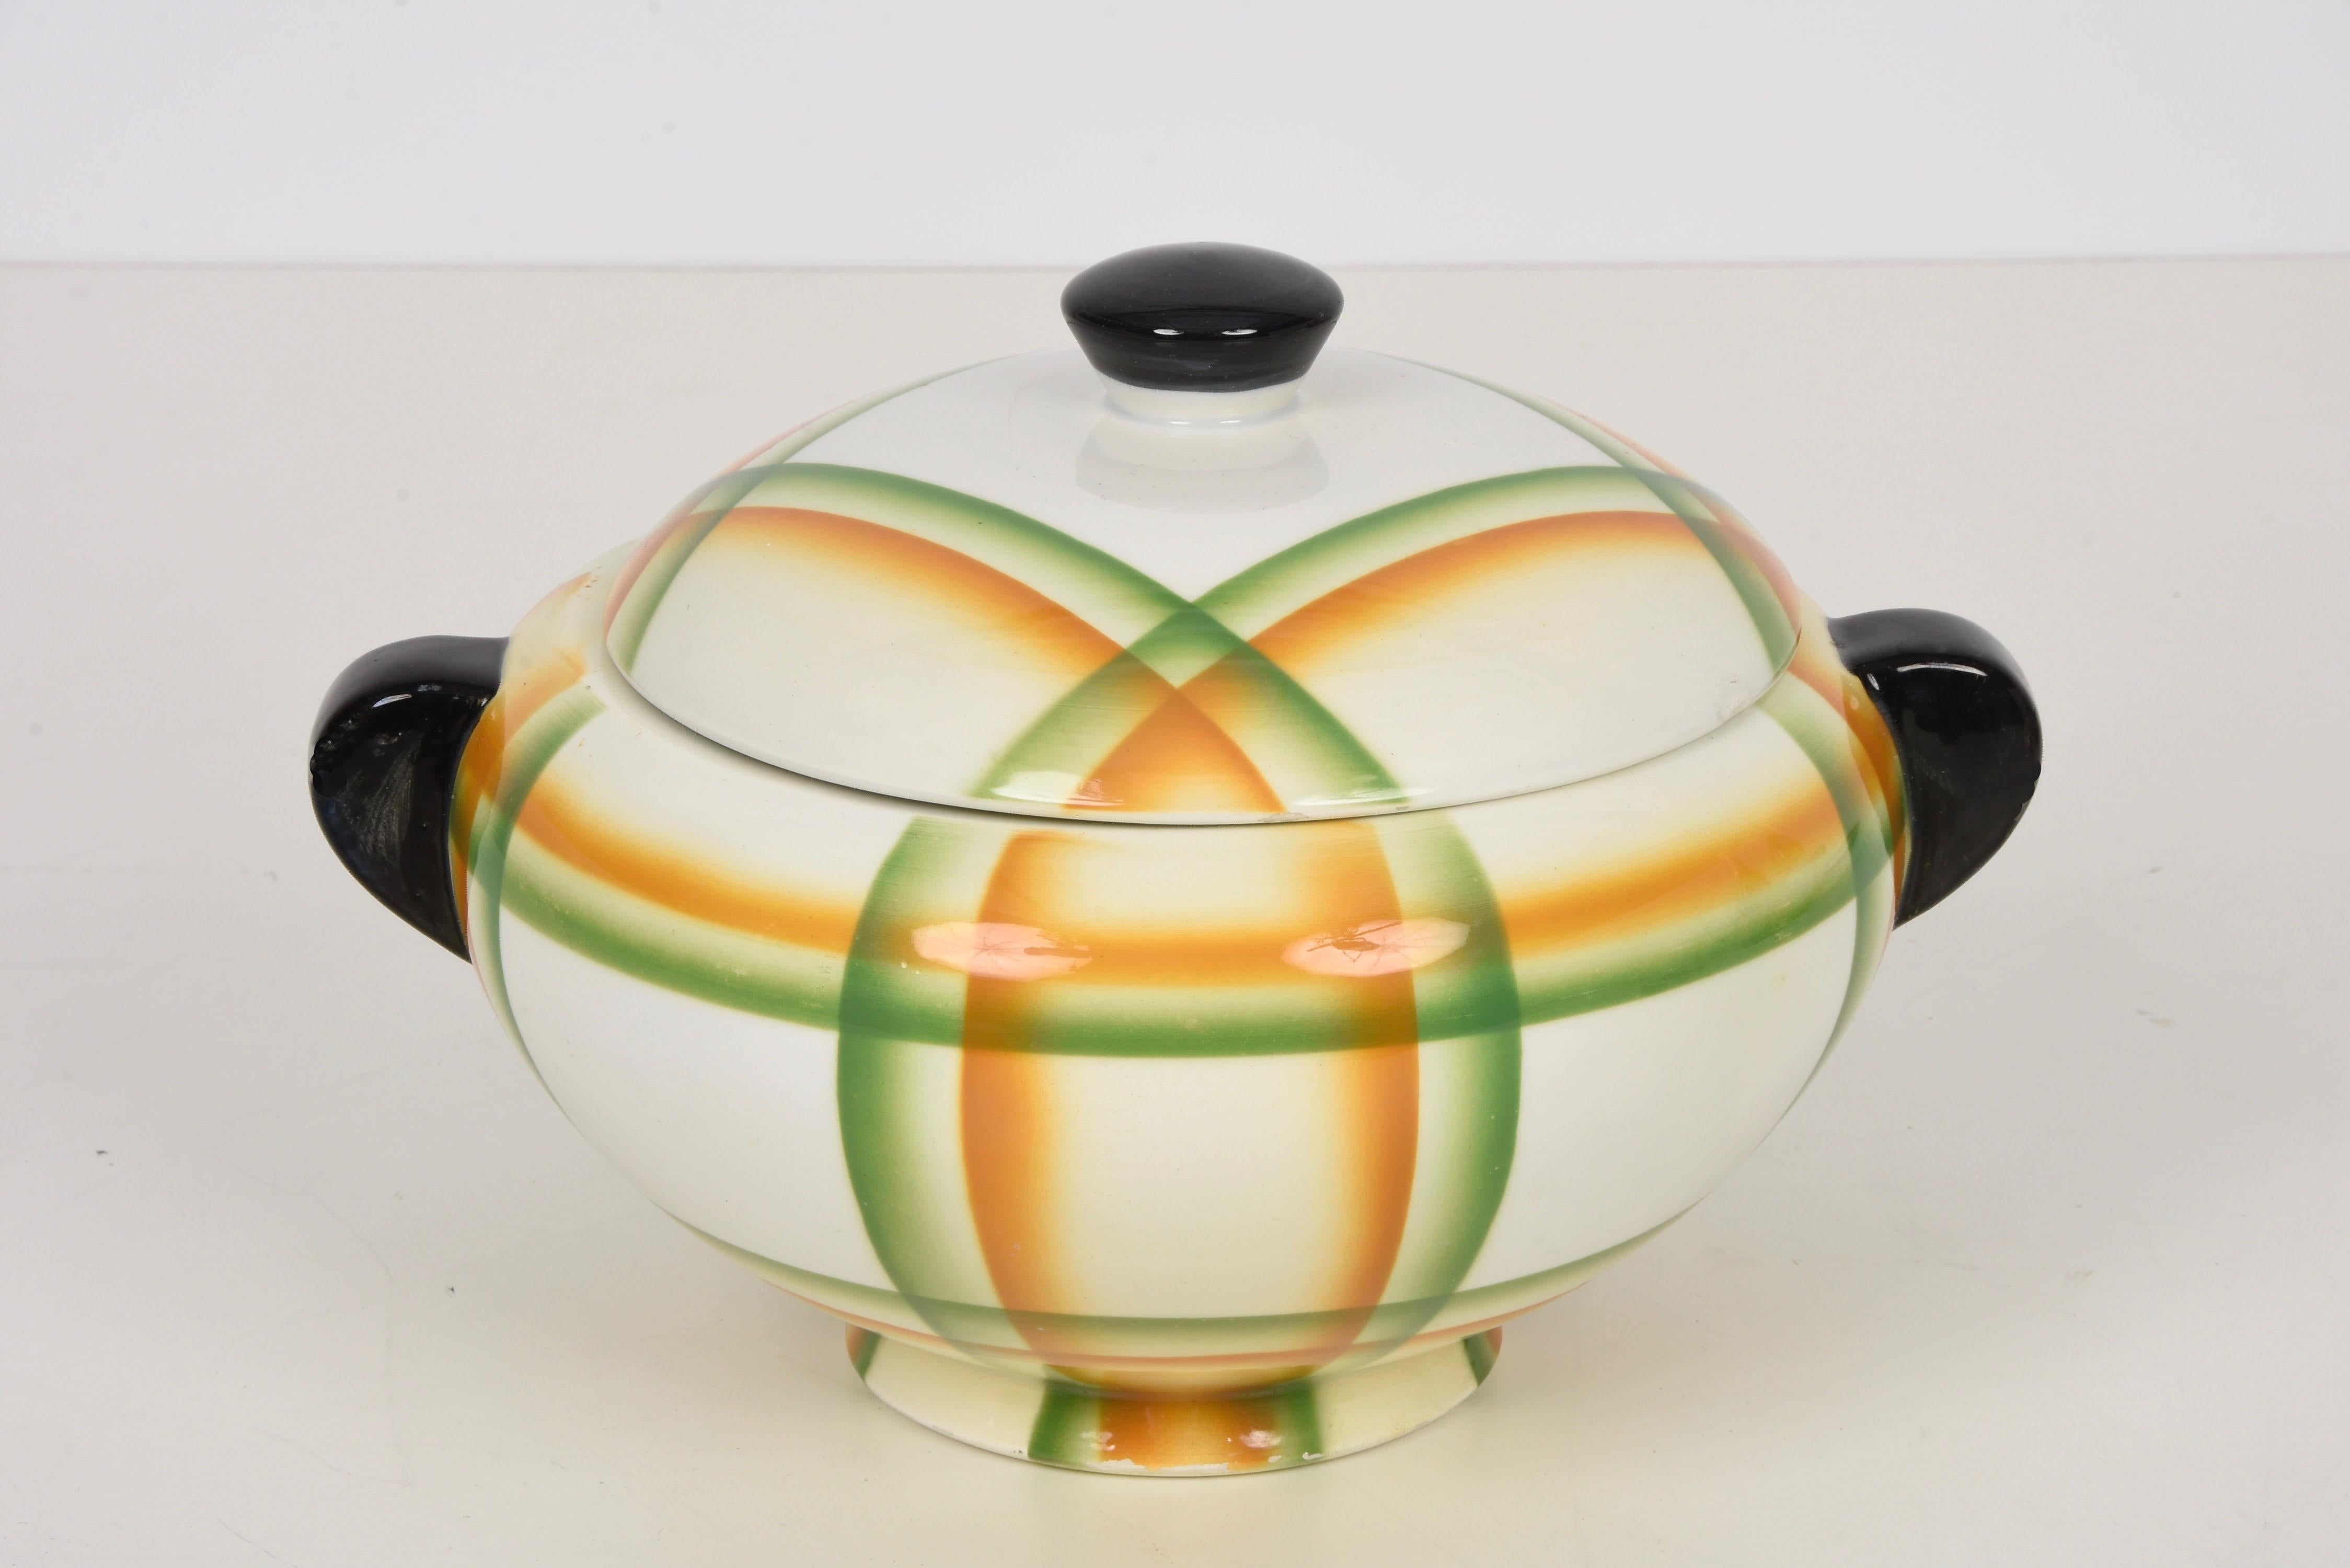 Wonderful Simonetto futuristic airbrushed ceramic centrepiece soup bowl. This fantastic item was produced in Italy during the 1930s by Cooperativa Ceramica Imola and designed by Angelo Simonetto.

It is a great futurist piece designed with